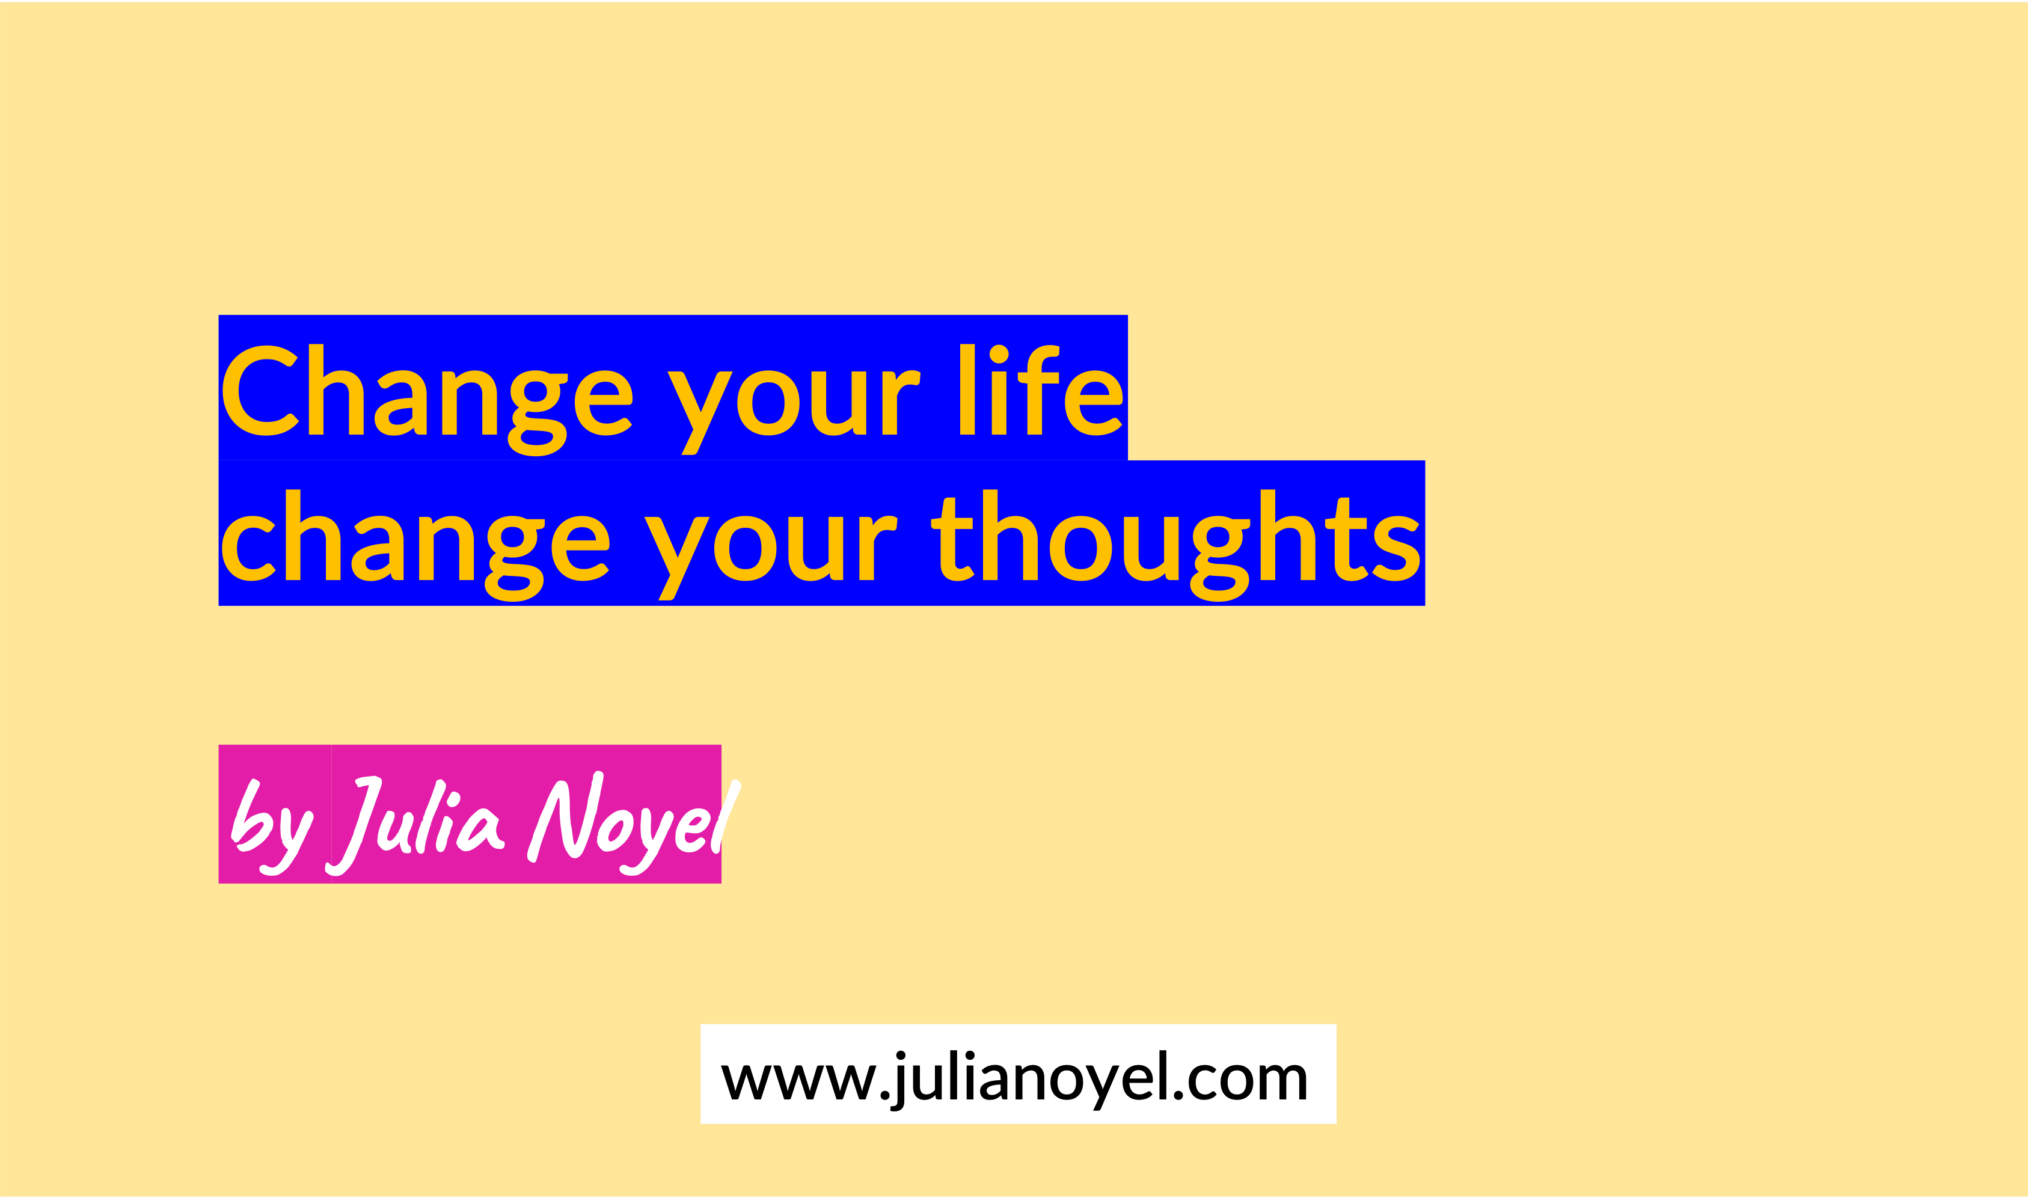 Change your life change your thoughts by Julia Noyel